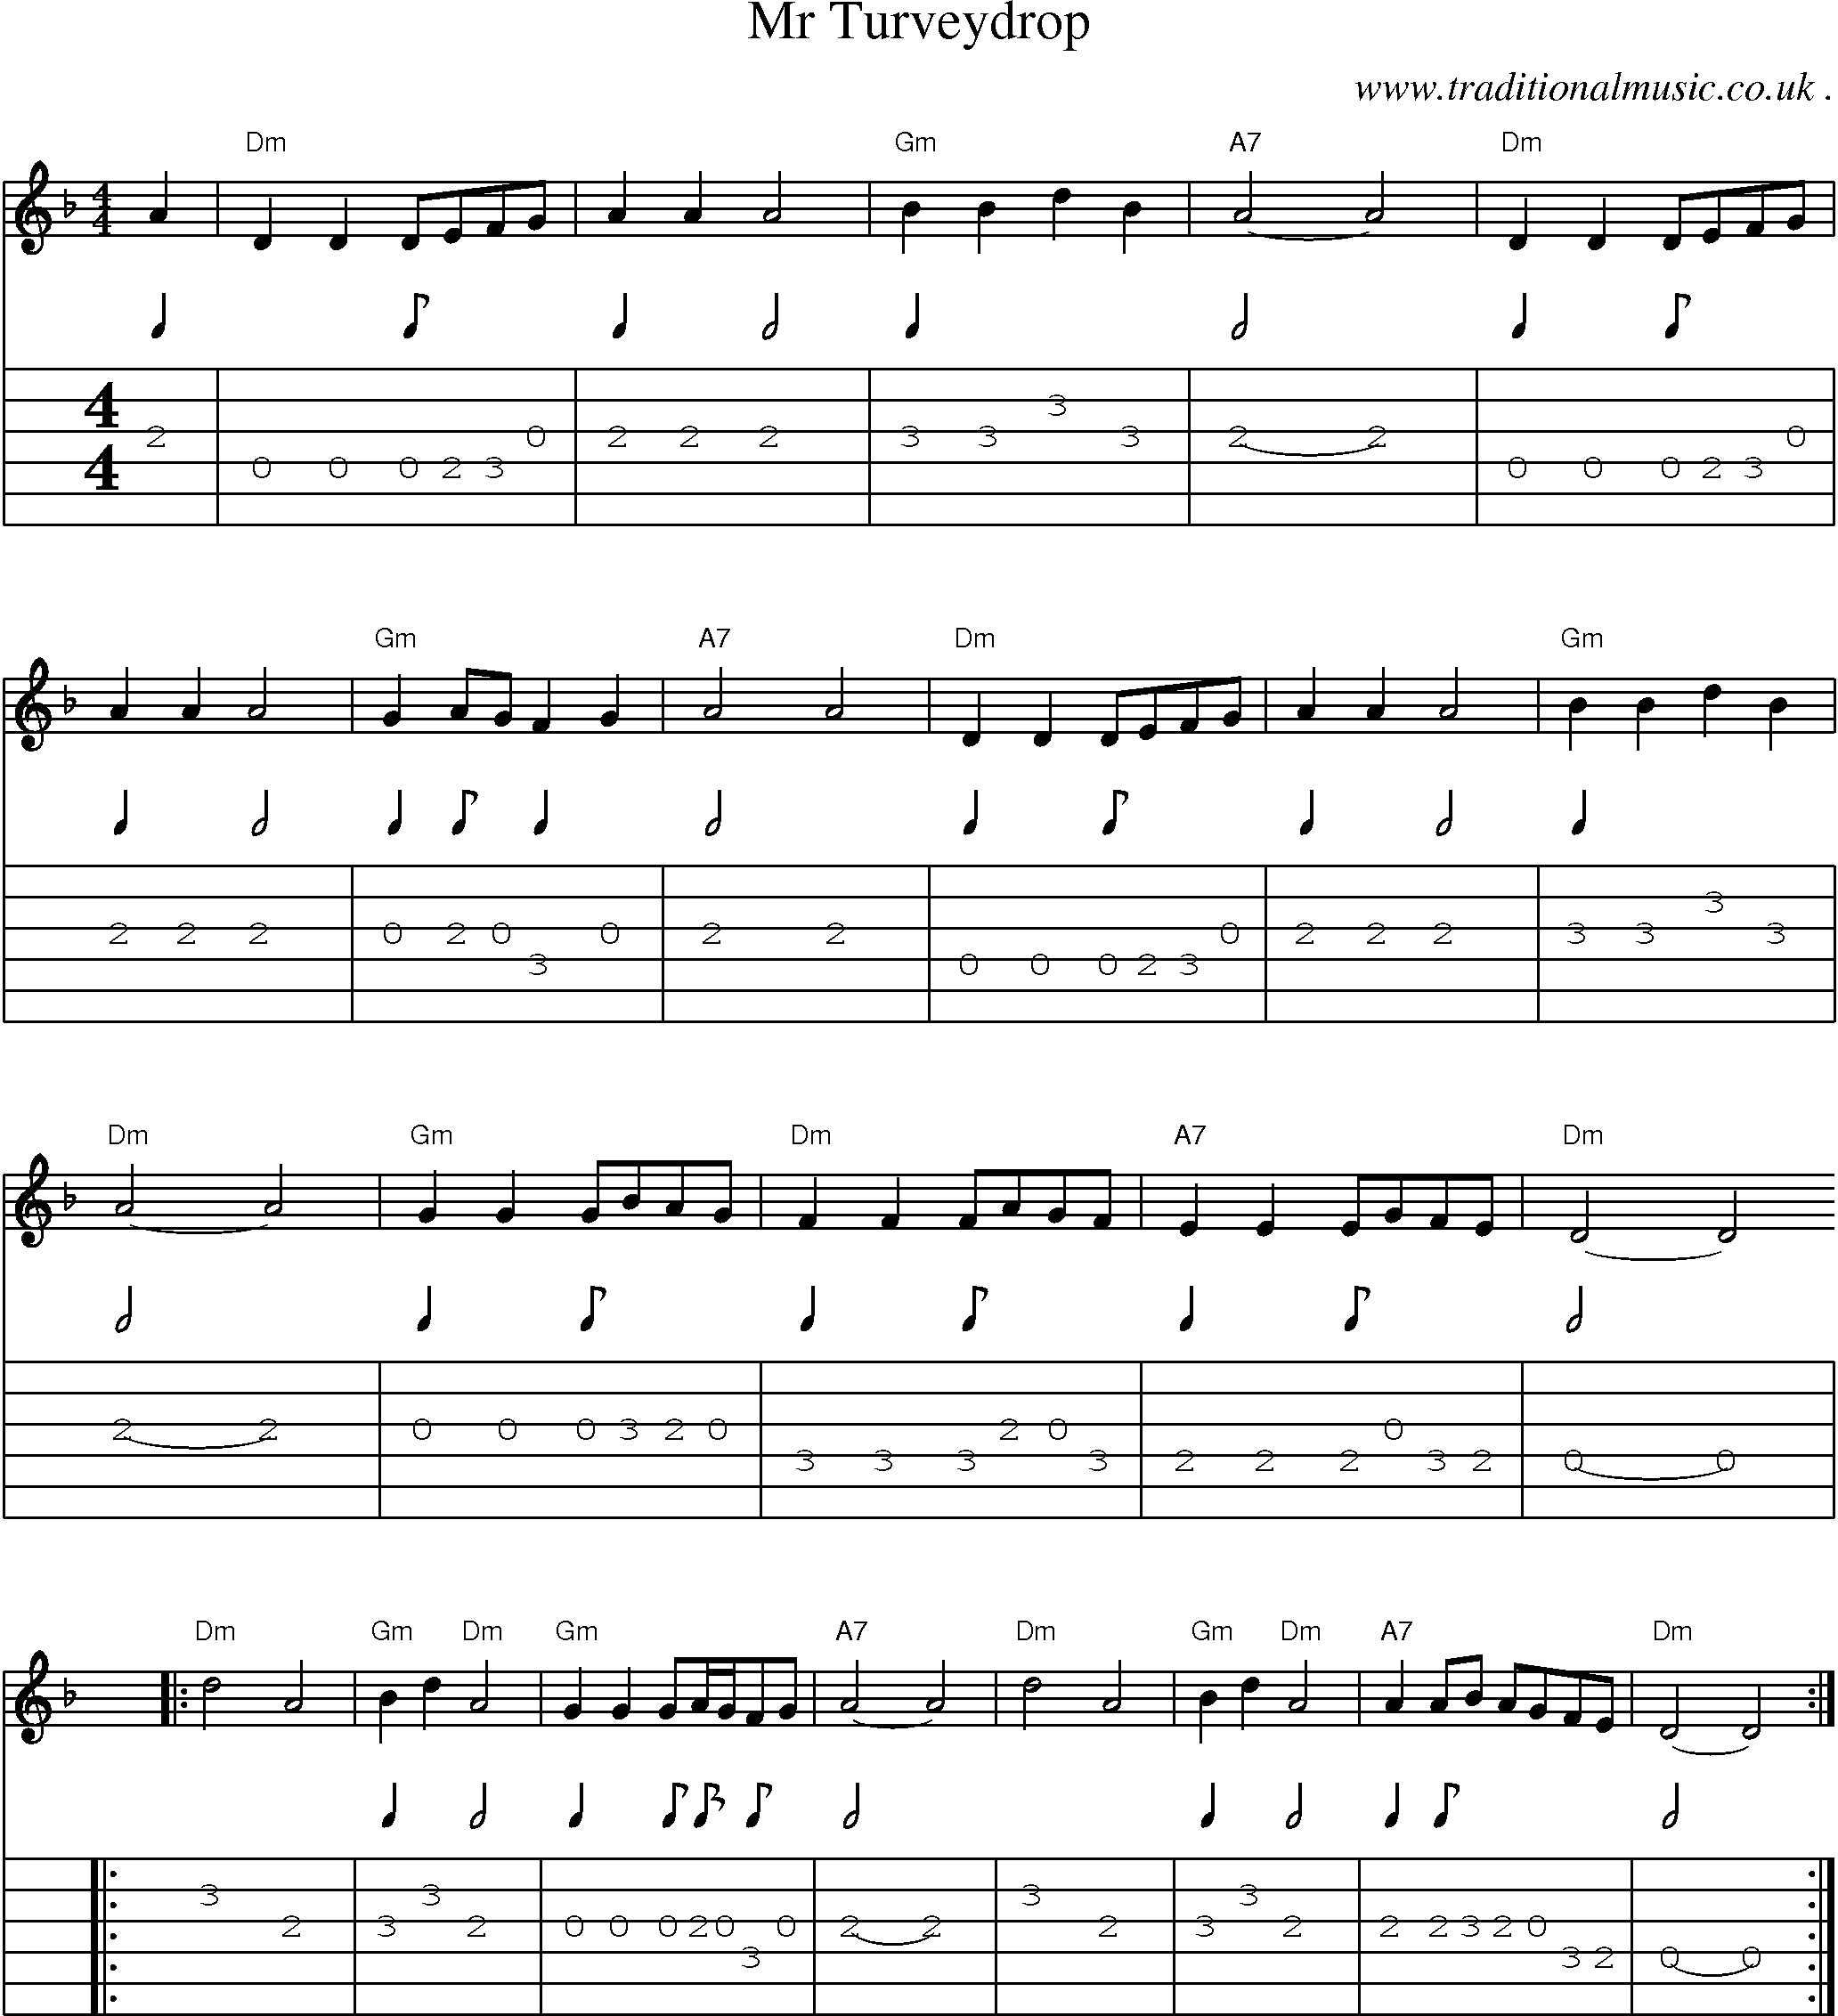 Sheet-Music and Guitar Tabs for Mr Turveydrop